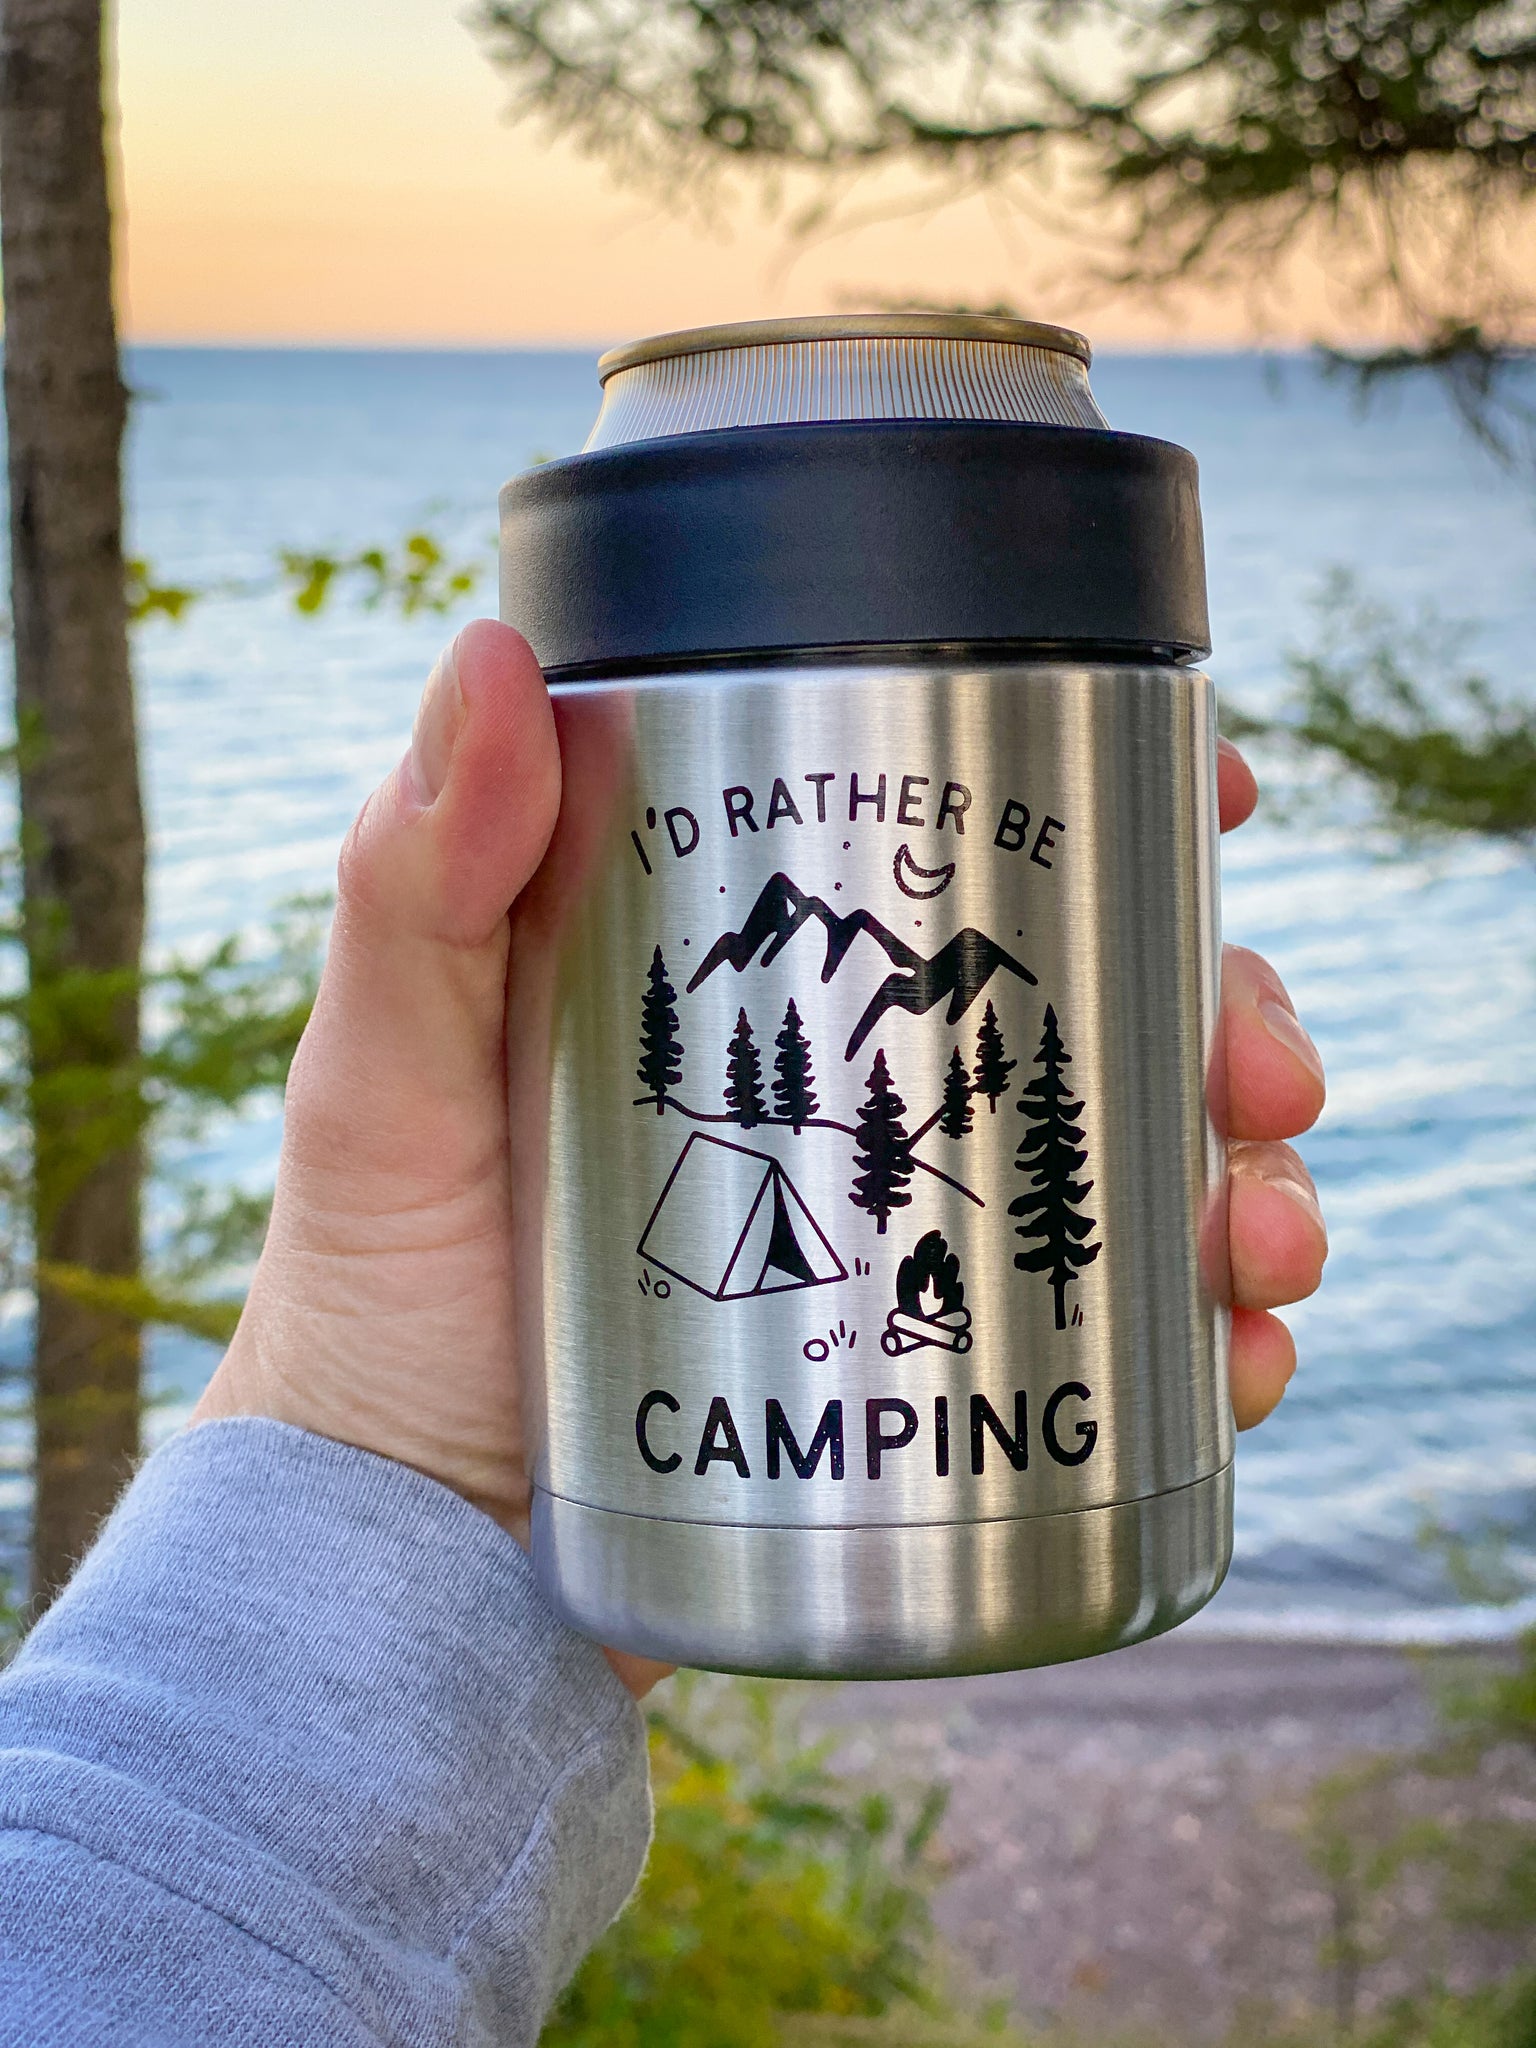 Rather Be Camping - 12oz Can Cooler